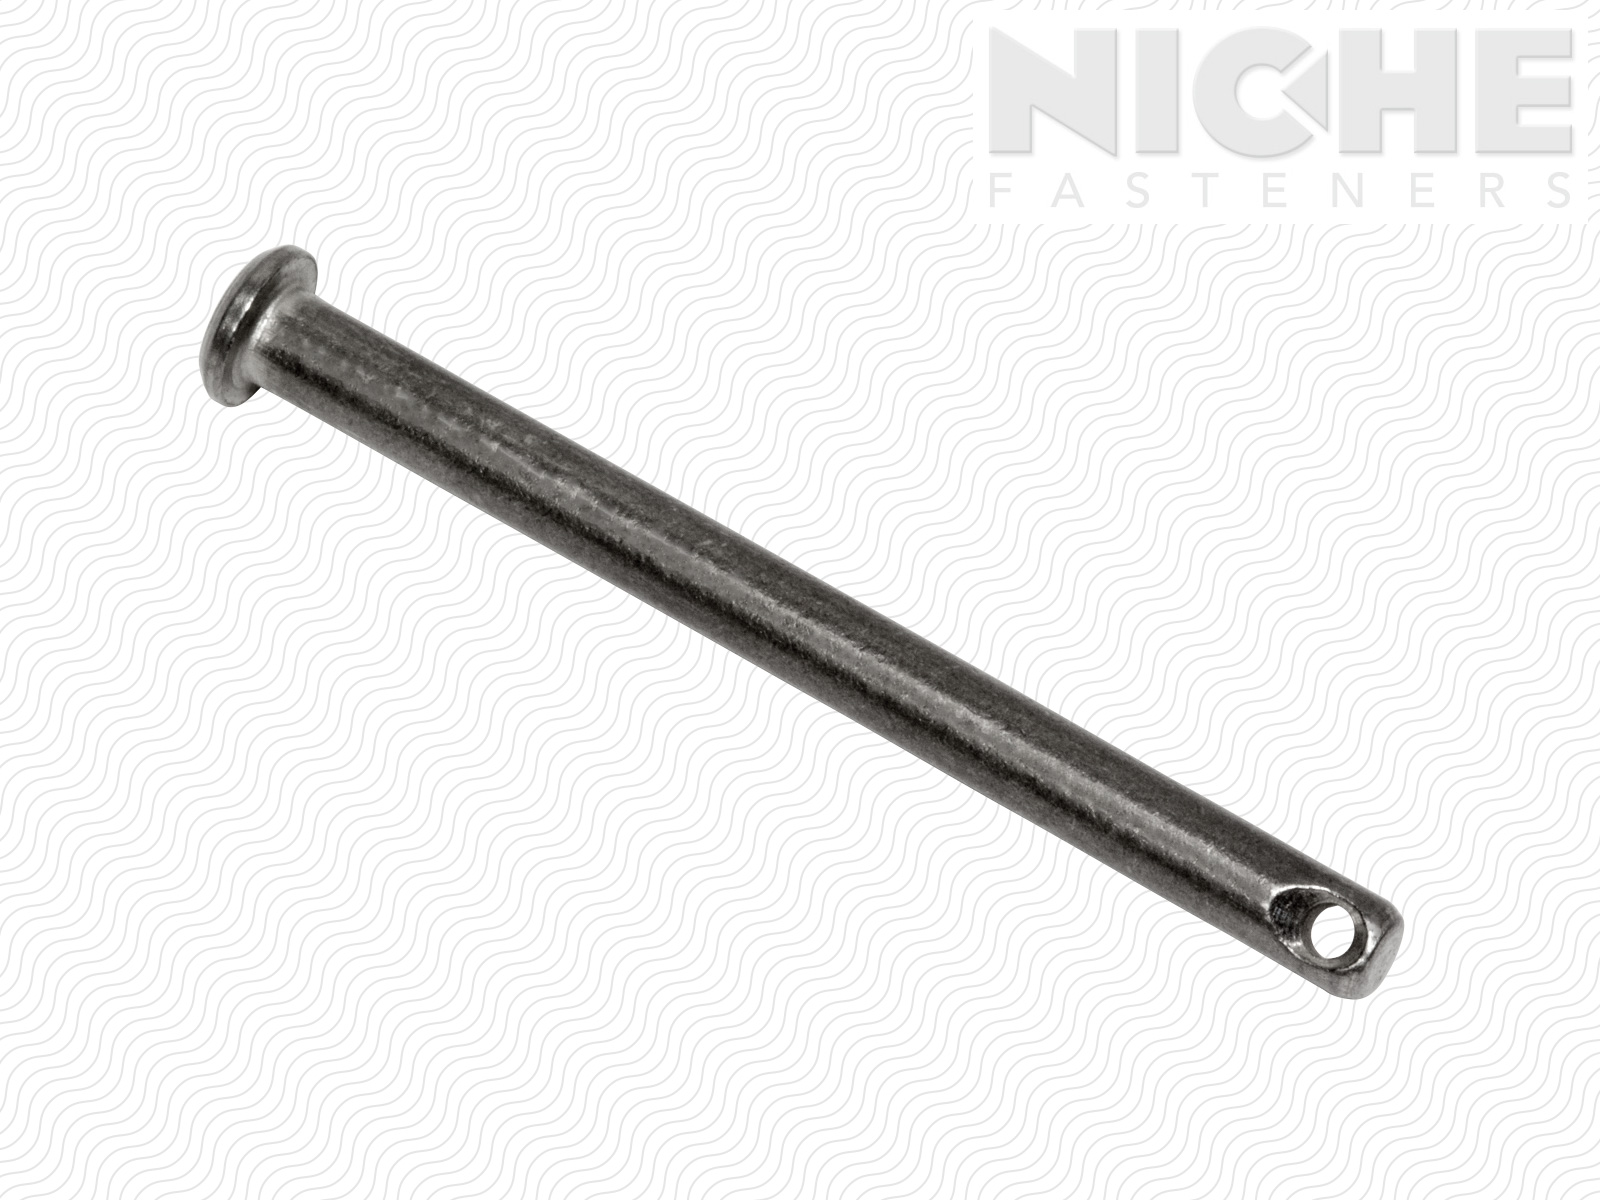 Clevis Pin 1/2 x 1-1/2 SS300 PL 8 Pieces